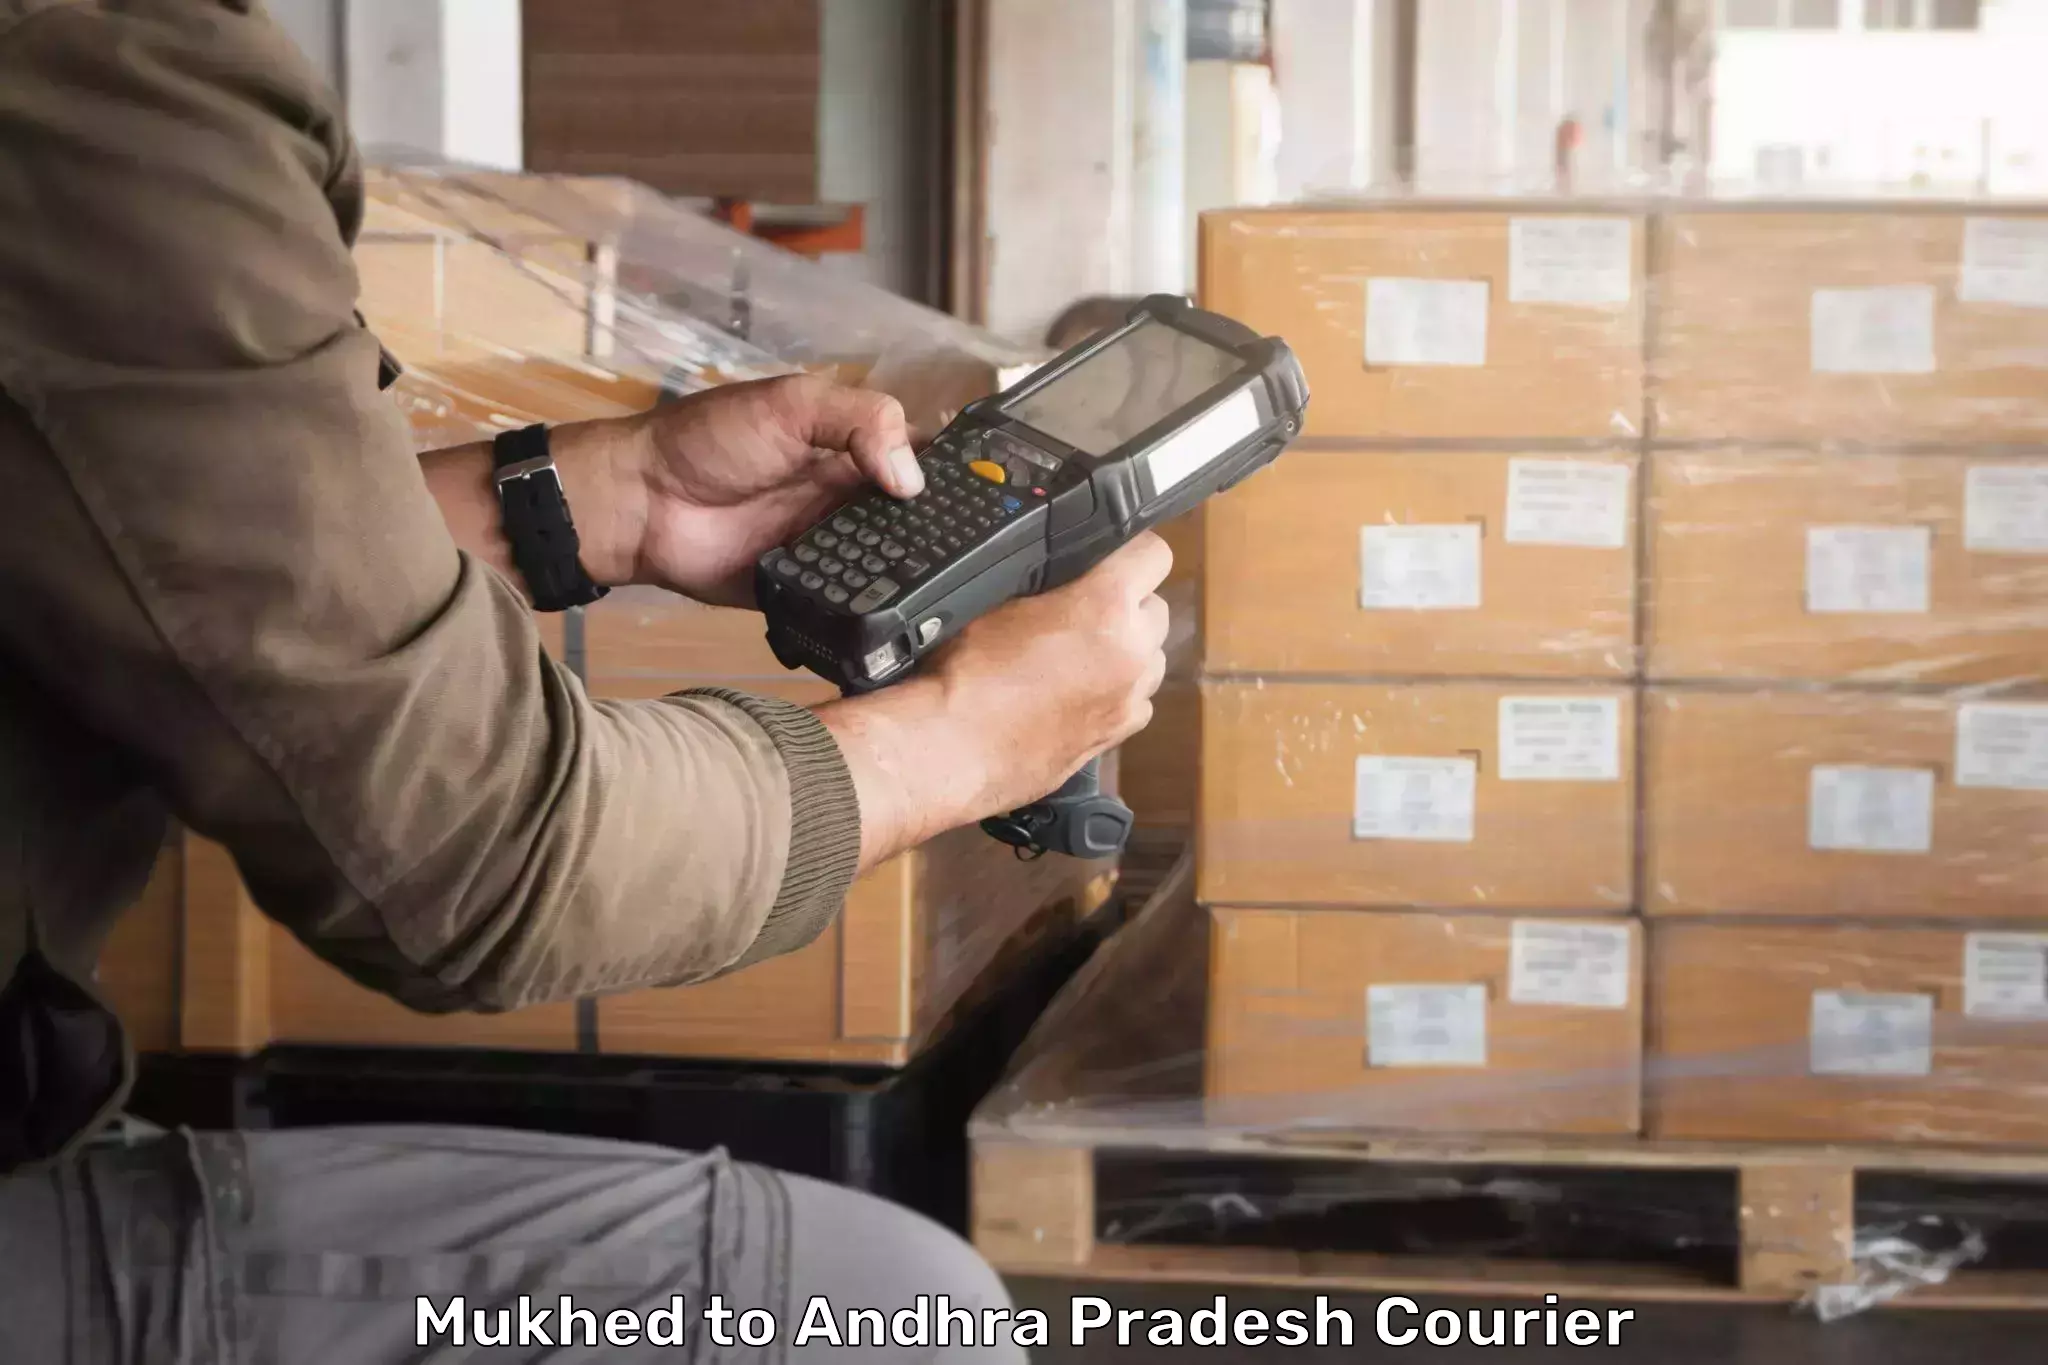 Pharmaceutical courier Mukhed to Andhra Pradesh